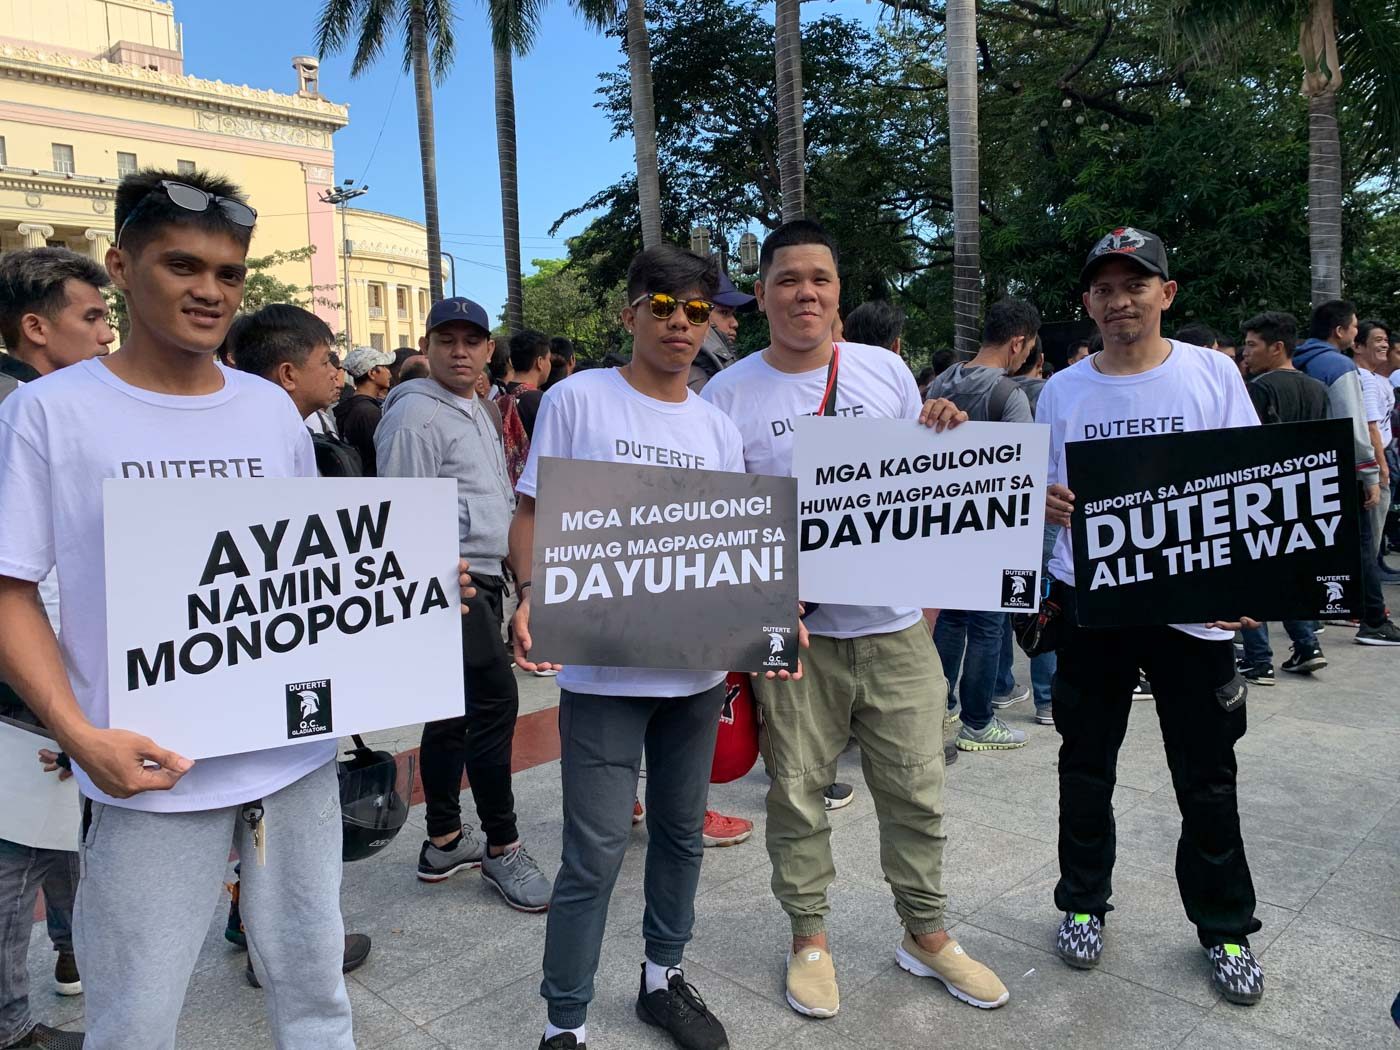 RALLY SIGNS. Members of the Duterte Quezon City Gladiators hold up signs in support of President Rodrigo Duterte and against monopolies, after Senator Koko Pimentel said he endorsed JoyRide to prevent Angkas from being a monopoly. Photo by Loreben Tuquero/Rappler 